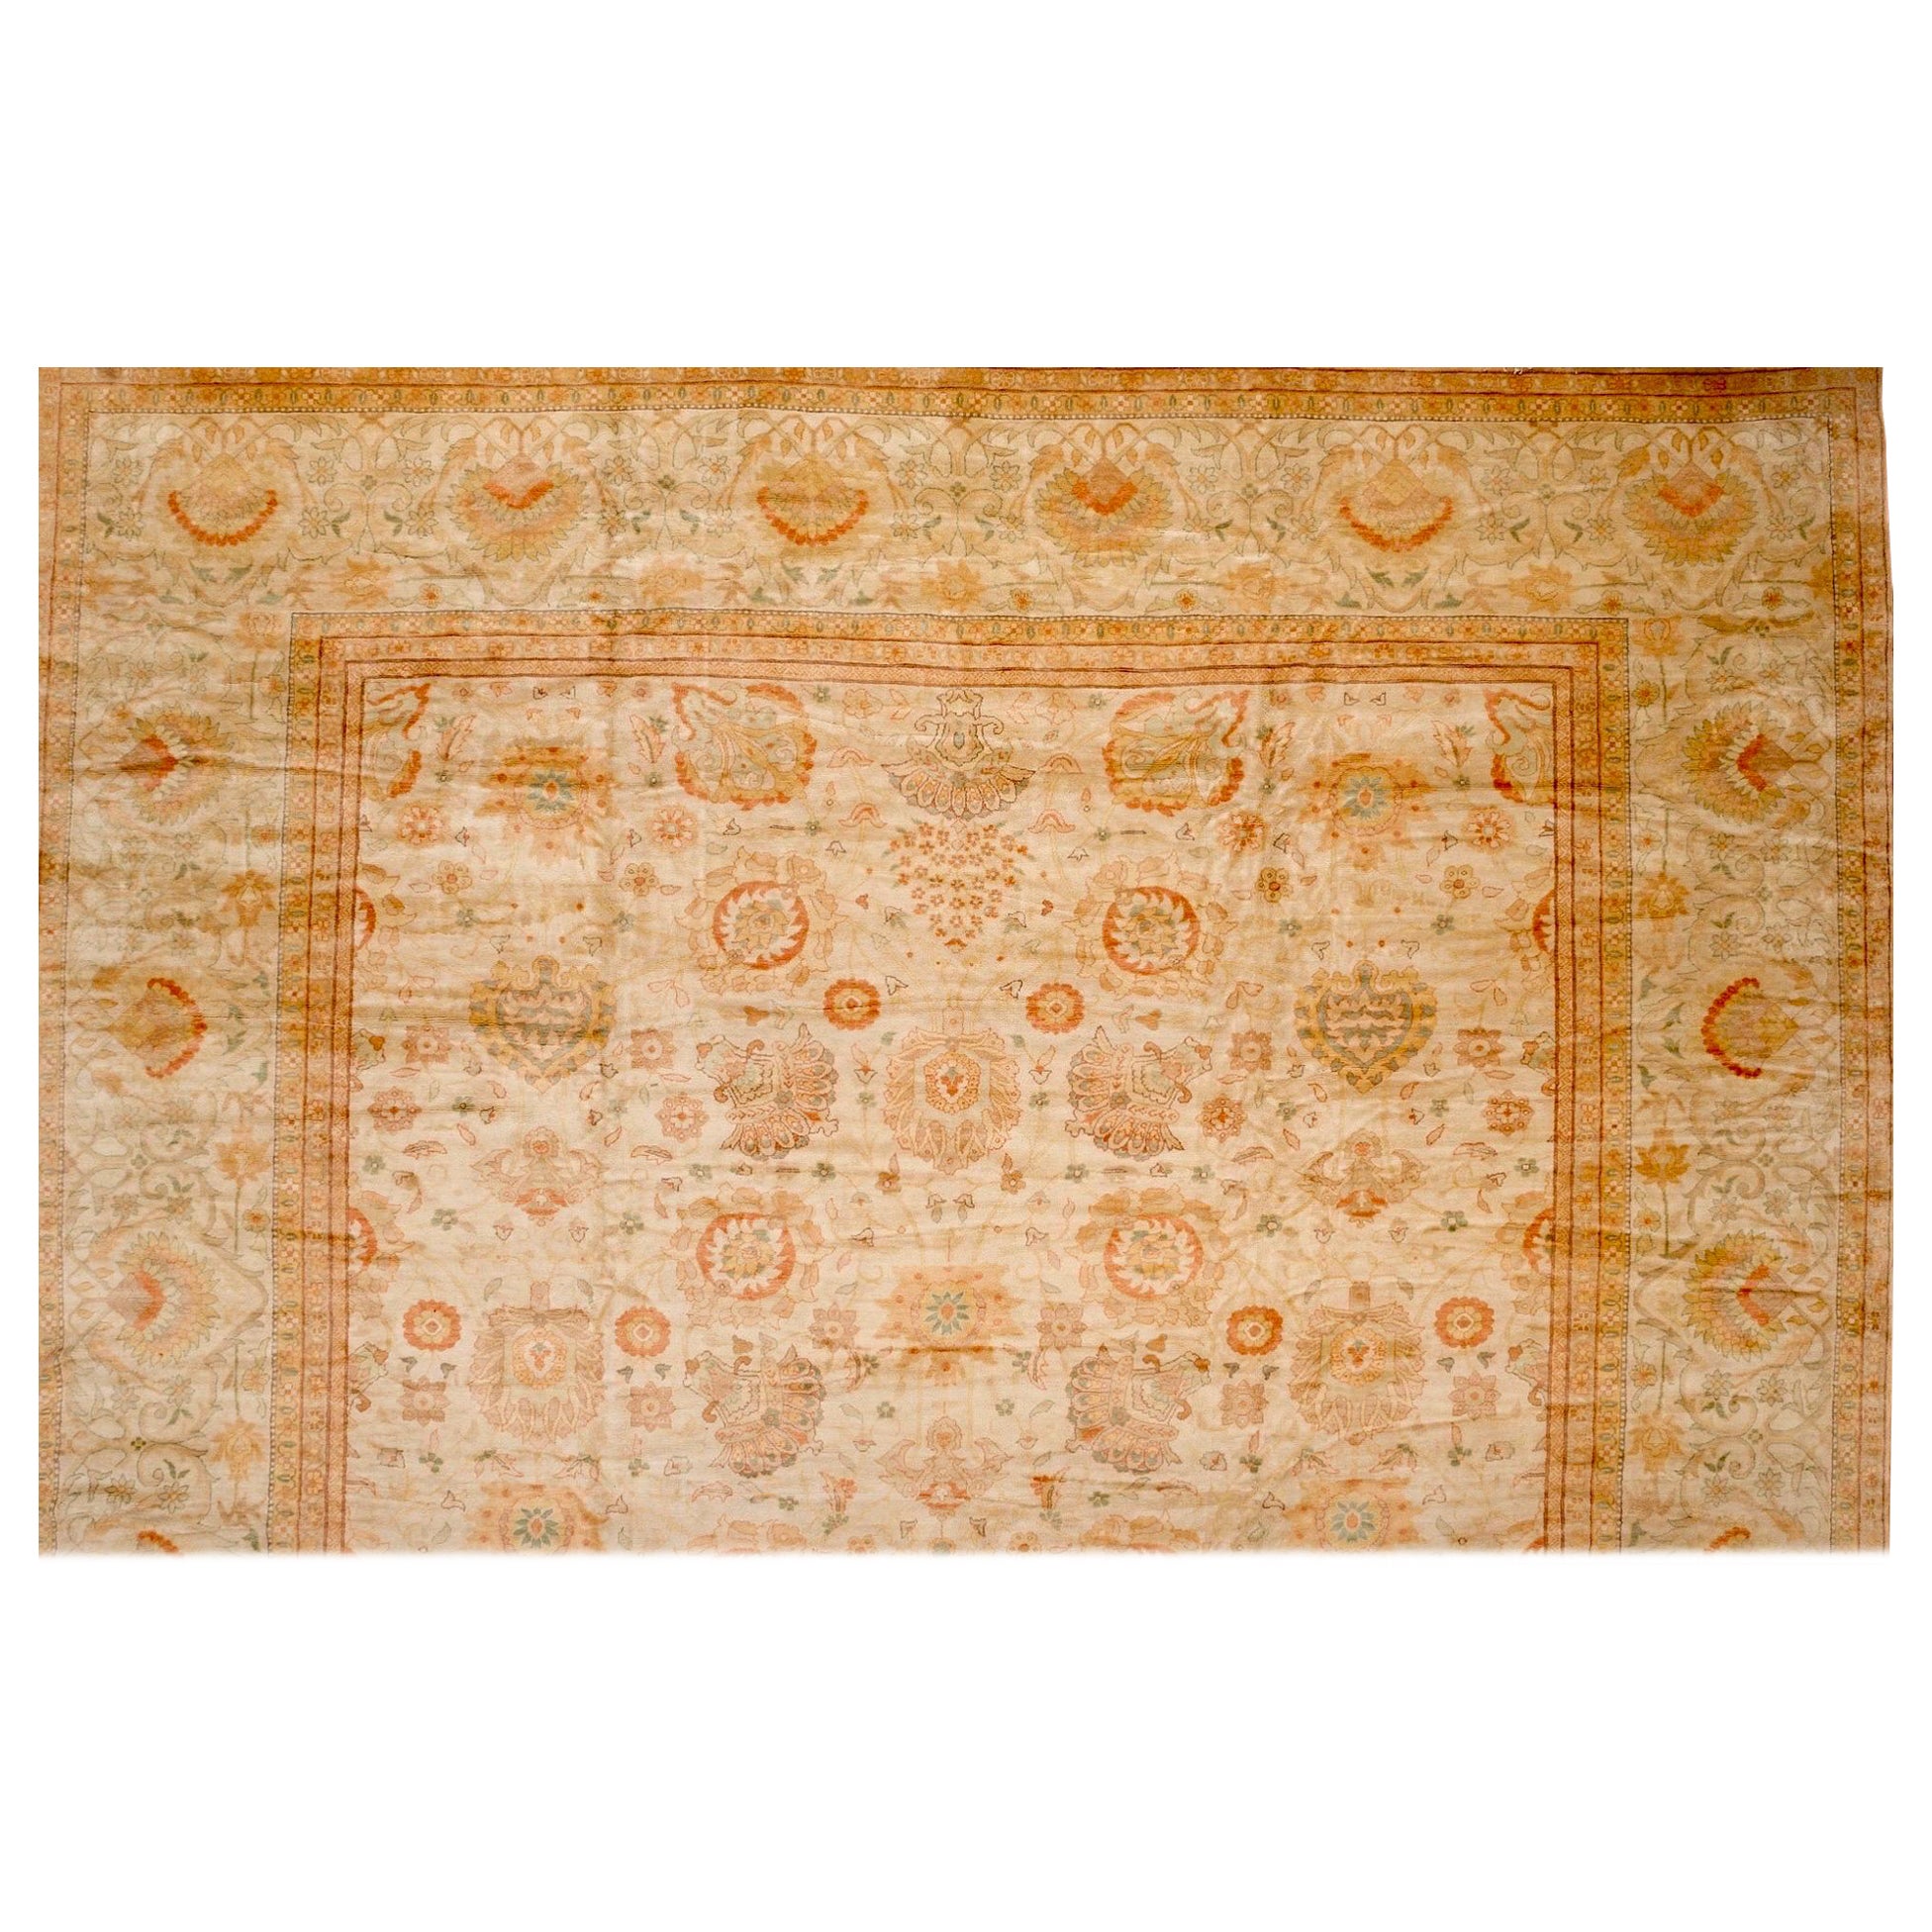 OVERSIZE Mansion Size Beige Ivory Persian Sultanabad Style Rug 18.7 x 39.8 ft  For Sale